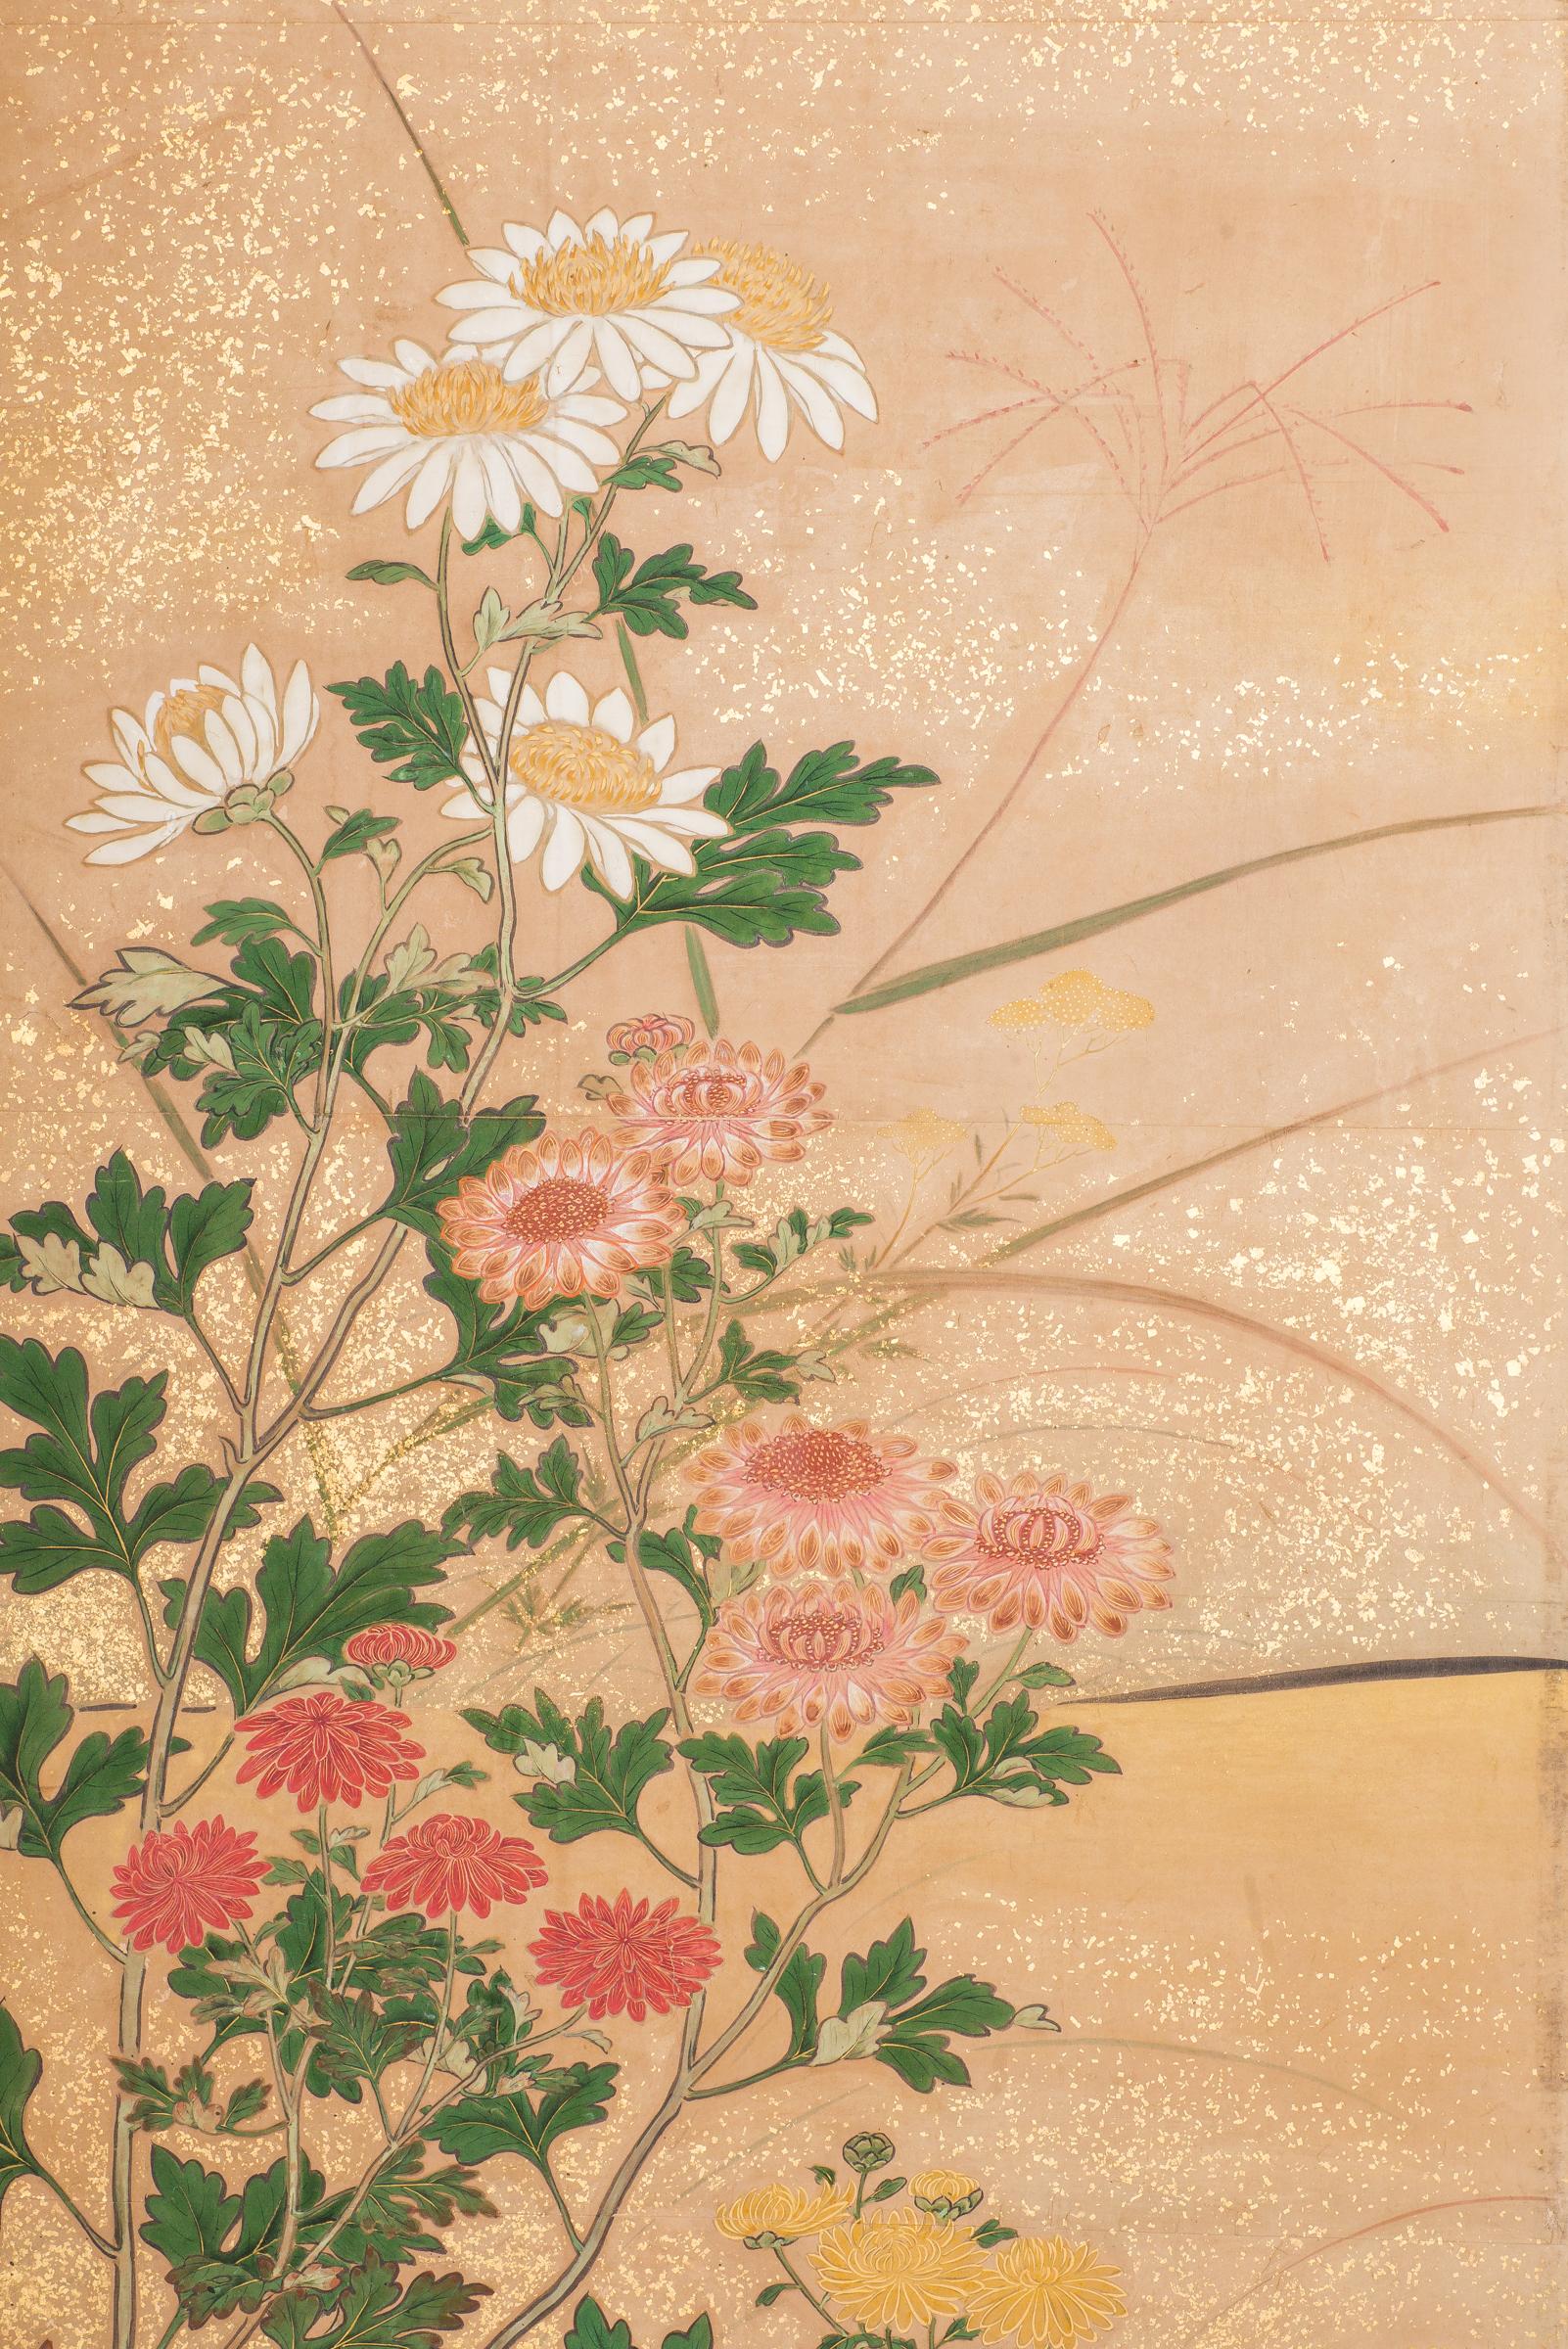 Japanese six-panel screen: Chrysanthemums, Edo period (circa 1800) painting of a variety of chrysanthemums in a garden landscape, with sparrows. Mineral pigments on paper with gold dust and a silk brocade border. Signature reads: Mutsu.